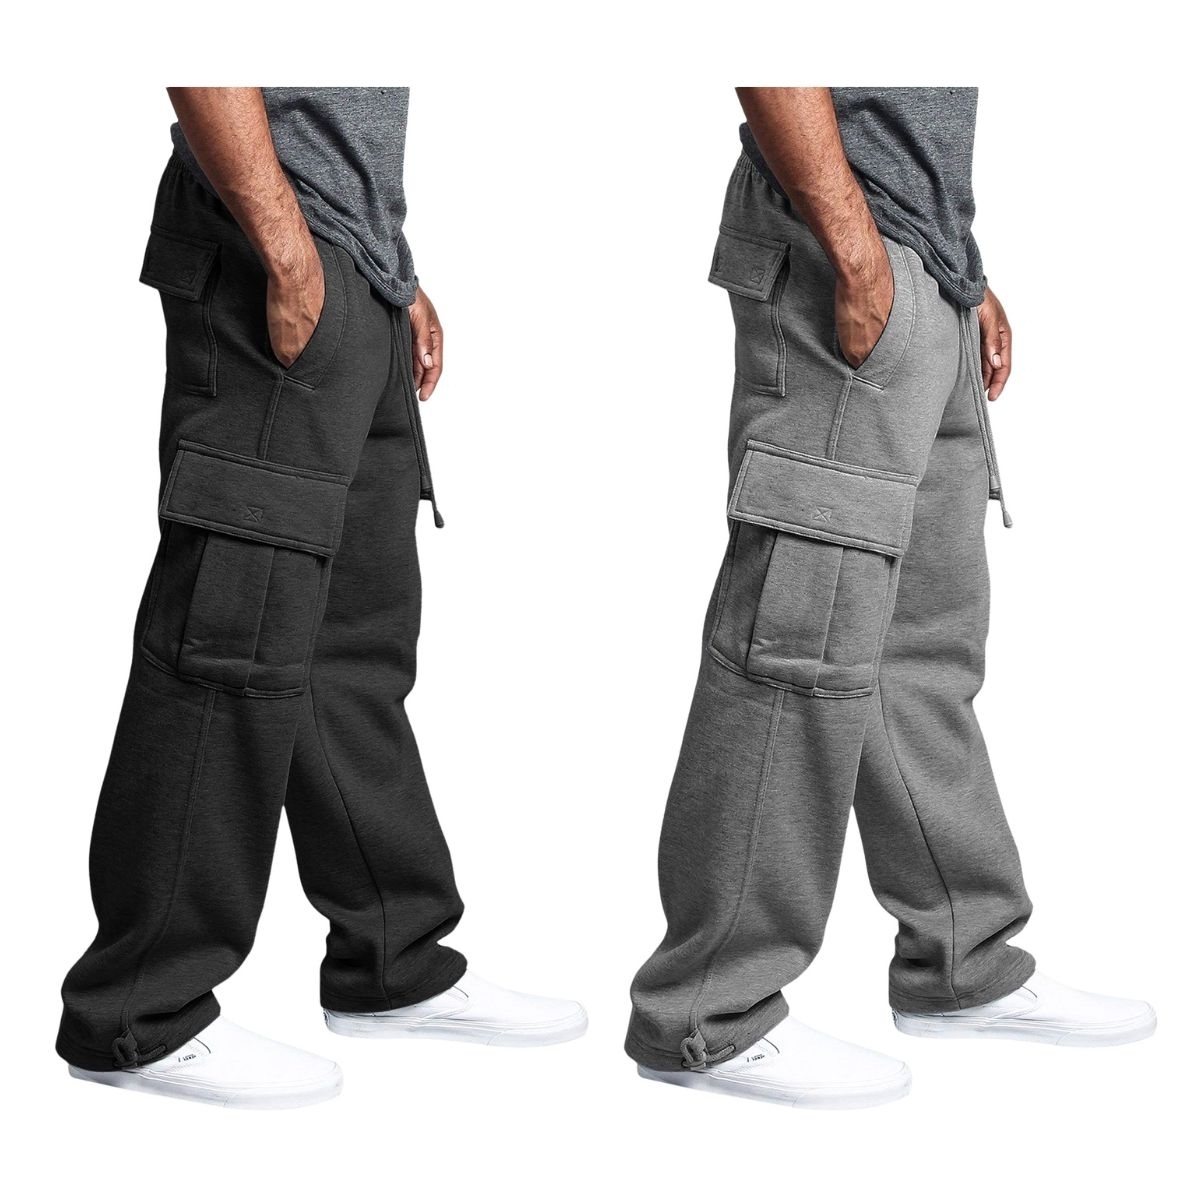 2-Pack: Men's Casual Solid Fleece Lined Cargo Jogger Soft Sweatpants With Pockets - Black&charcoal, X-large